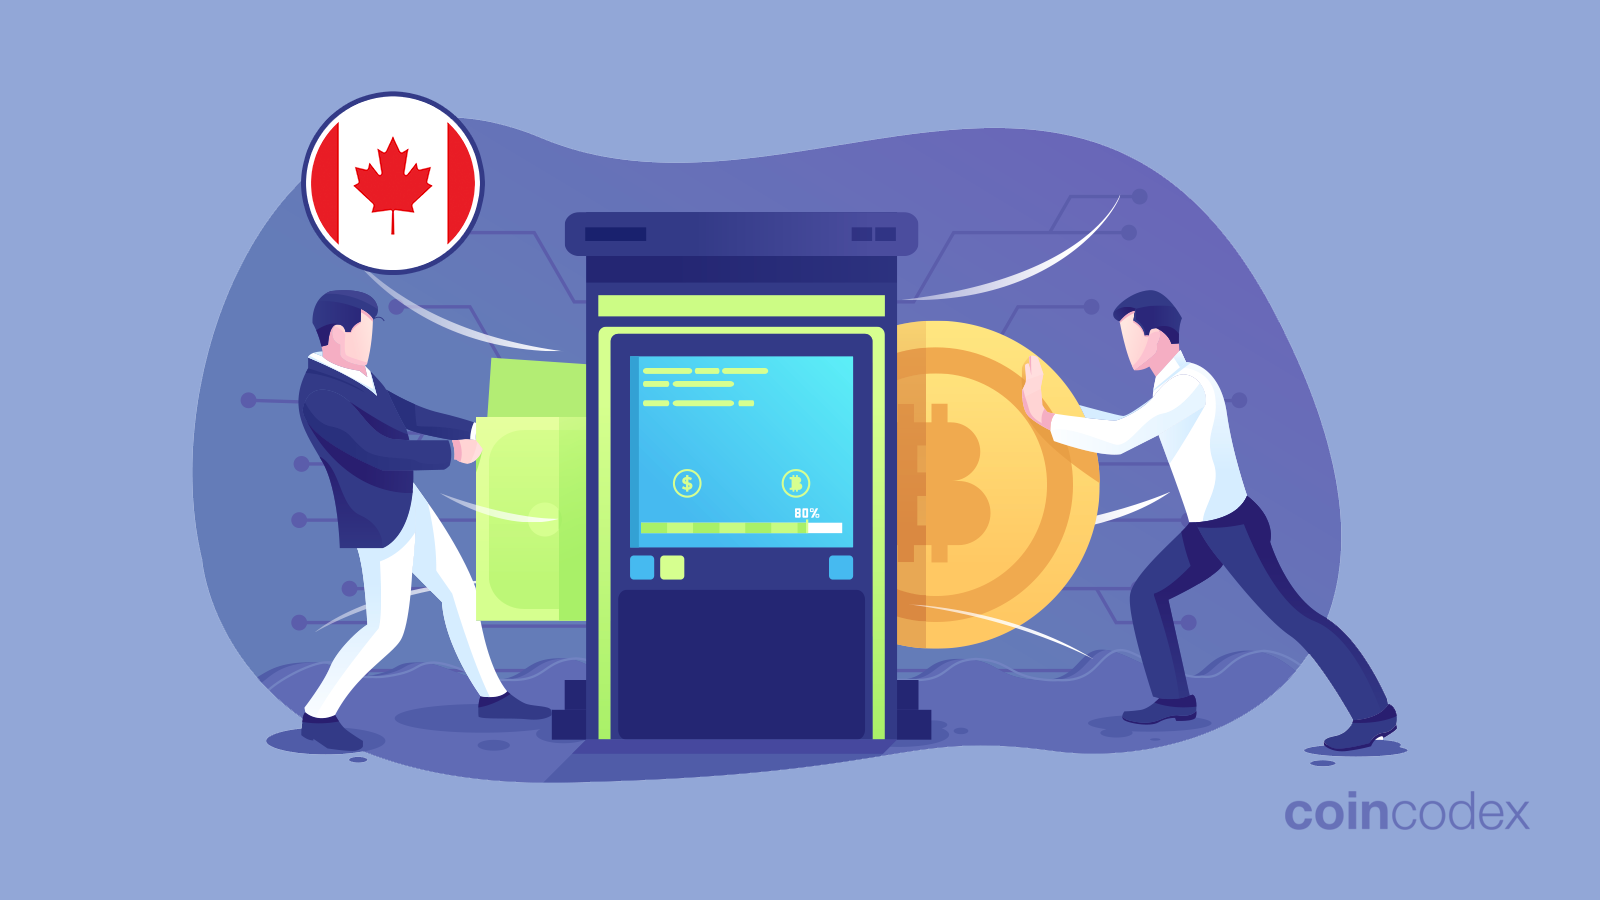 The top crypto platforms and apps in Canada - MoneySense